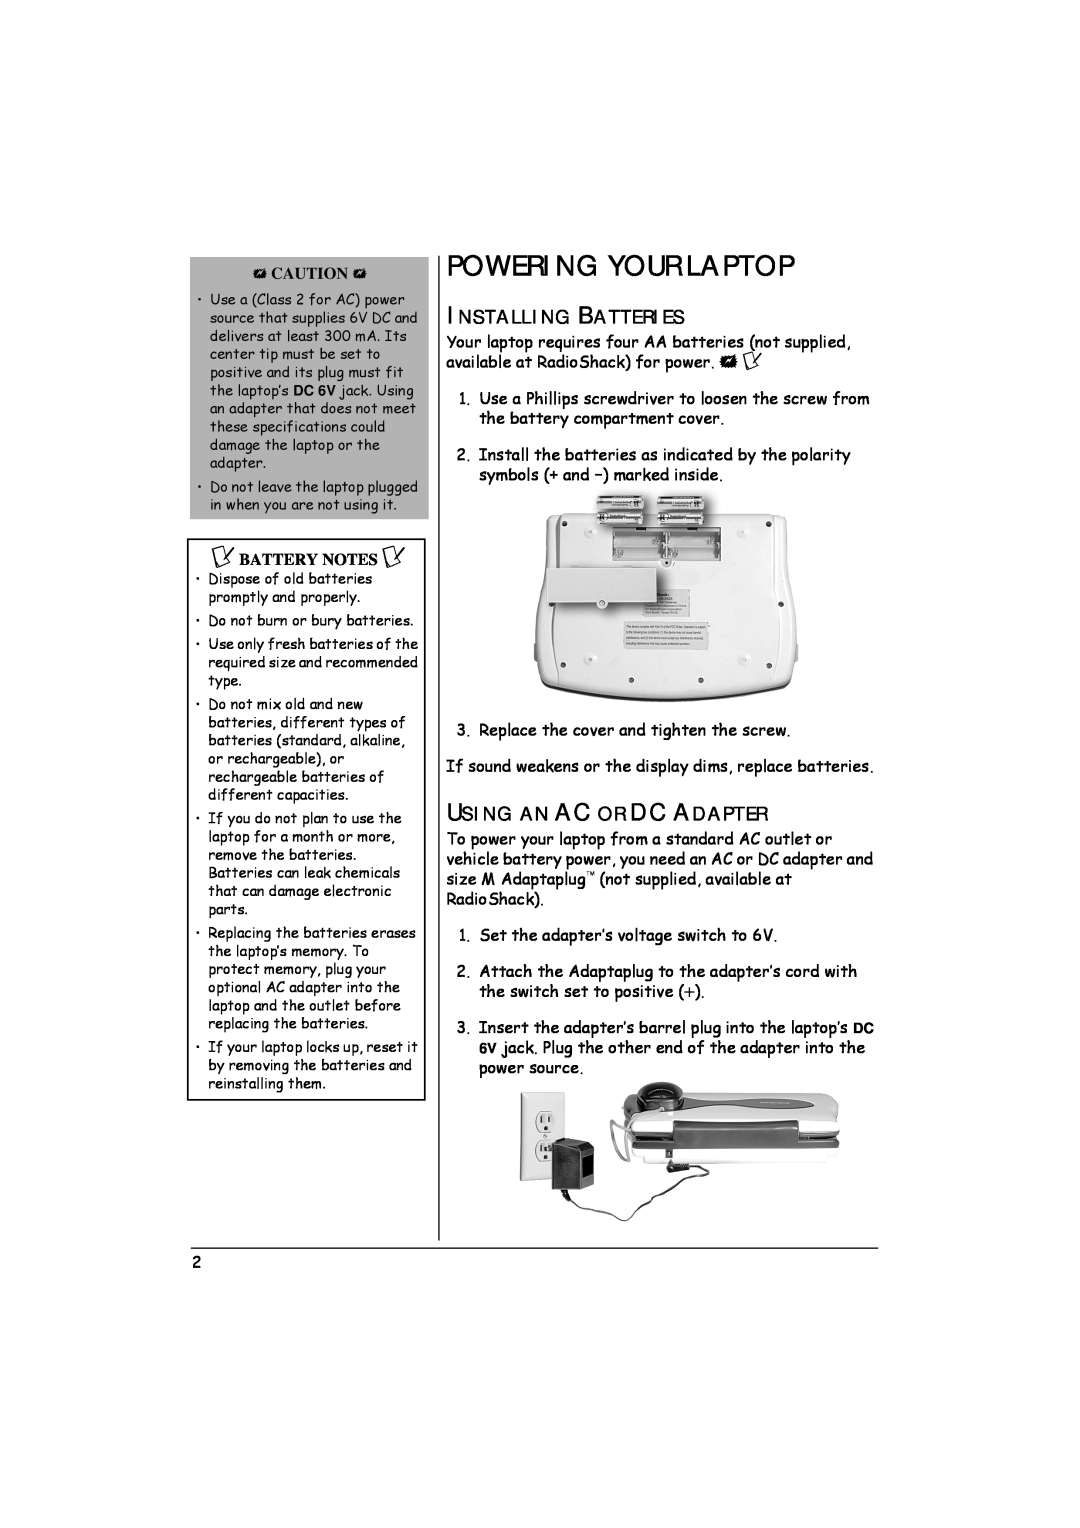 Radio Shack 60-2632 owner manual Powering Your Laptop, Installing Batteries, Using An Ac Or Dc Adapter, Ô Battery Notes Ô 